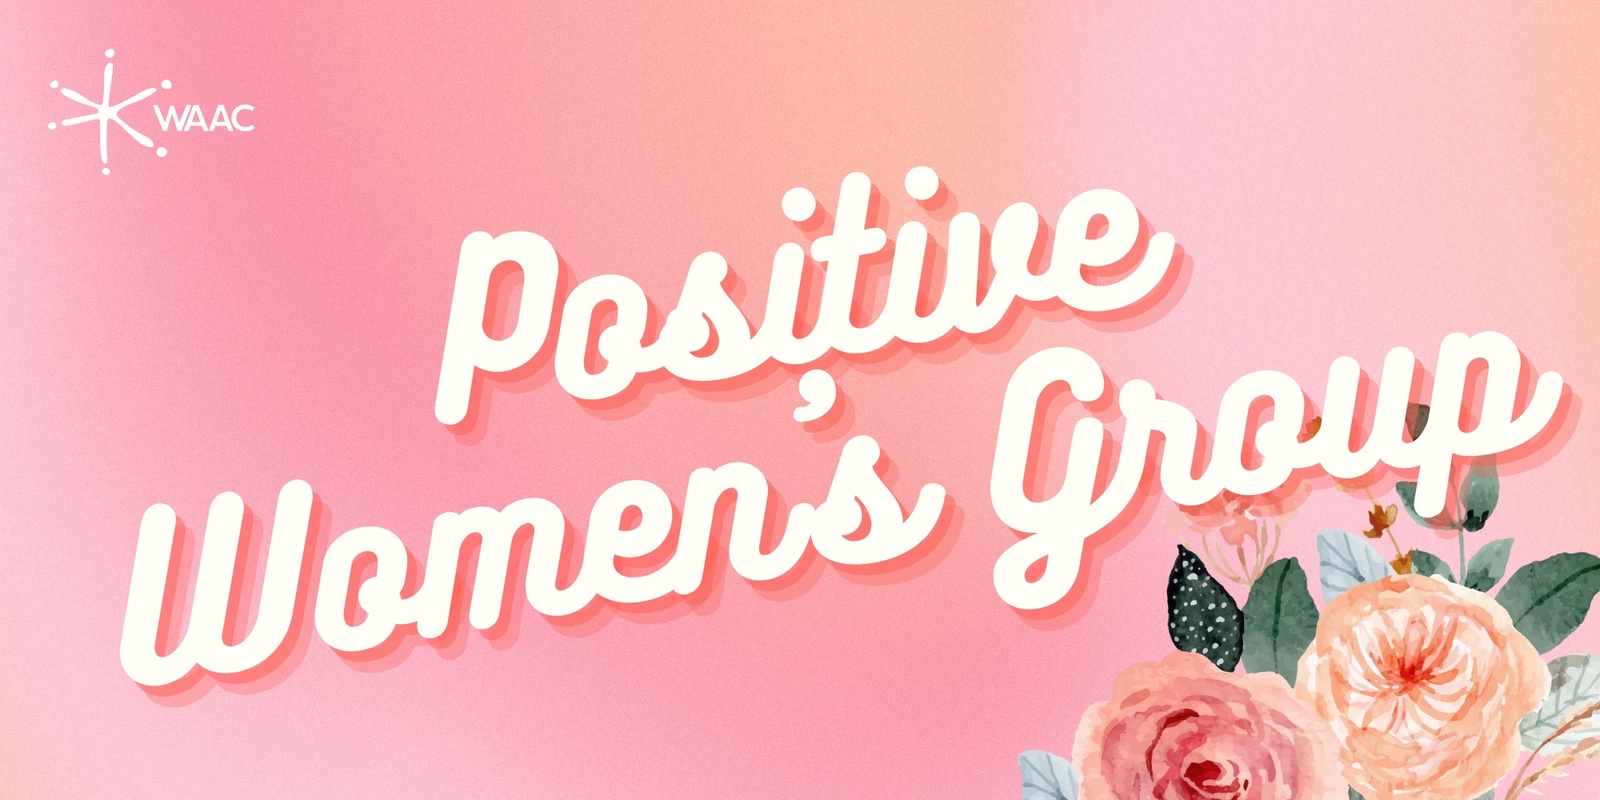 Banner image for WAAC Positive Women's Group